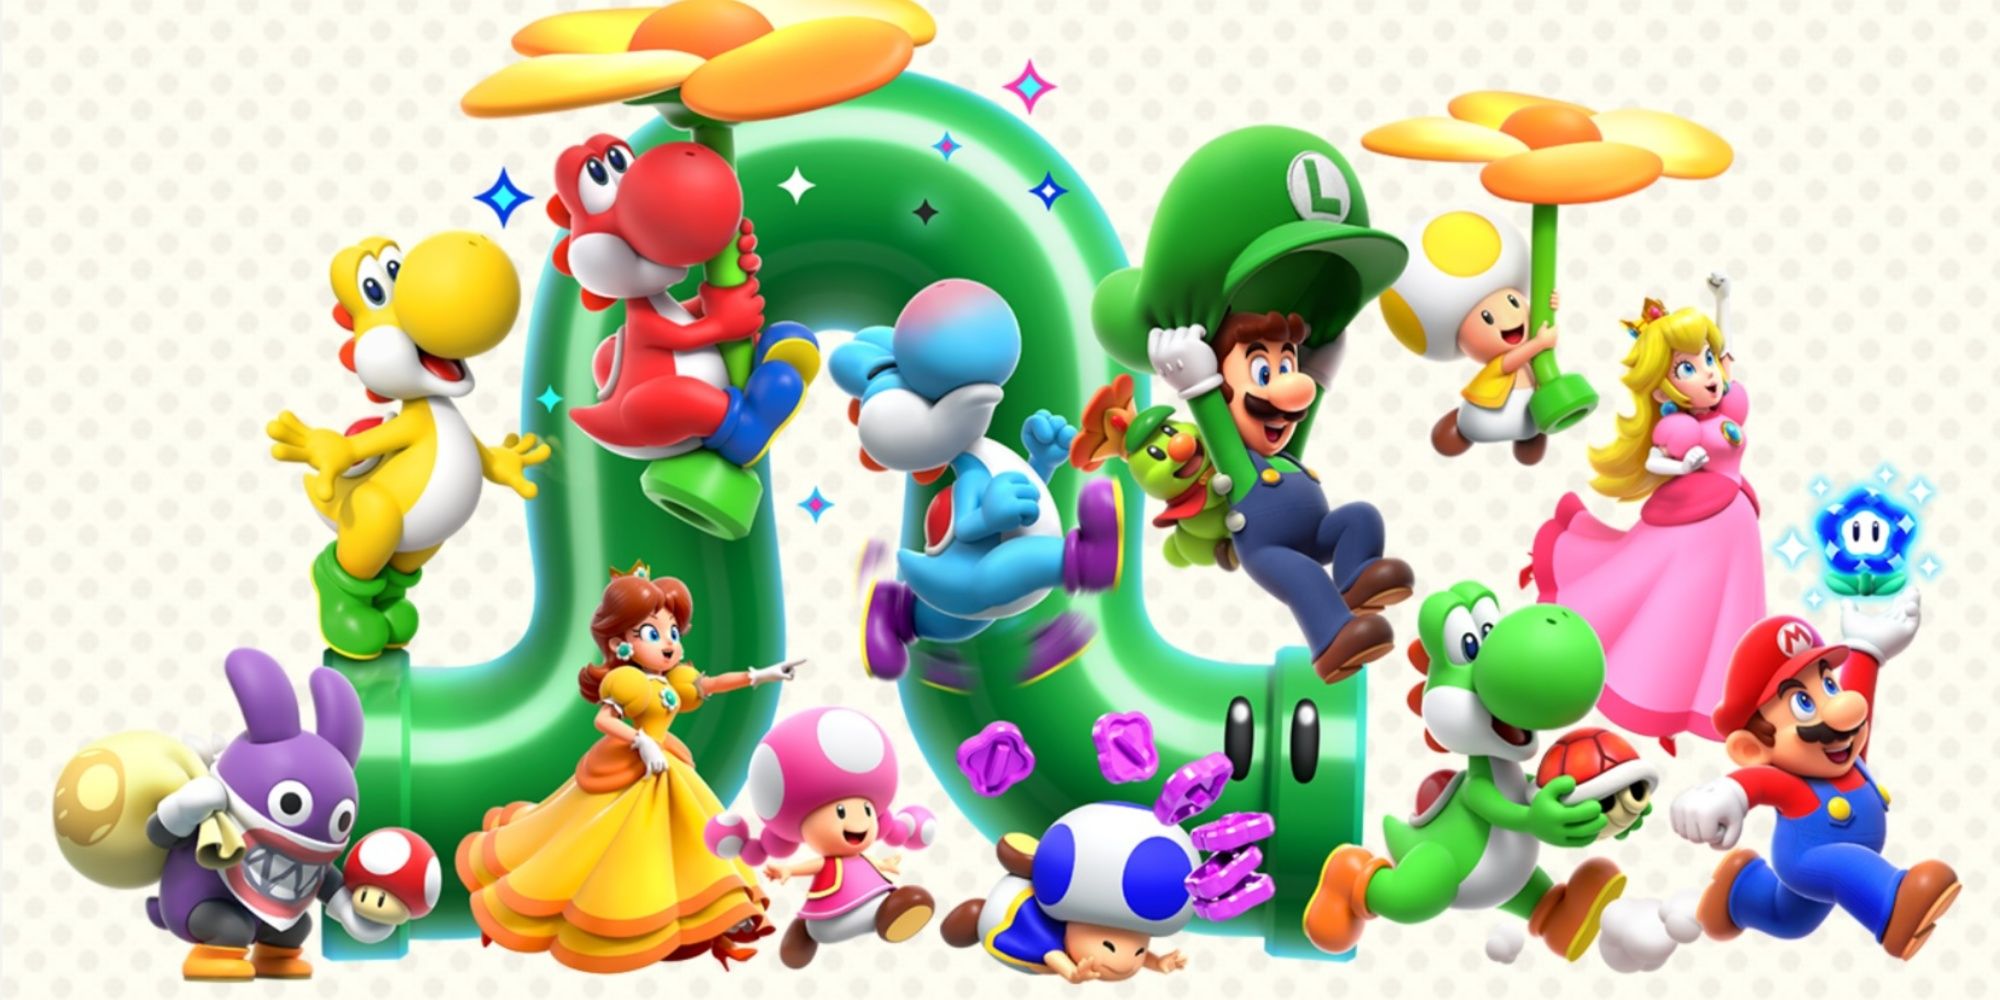 mario wonder characters together